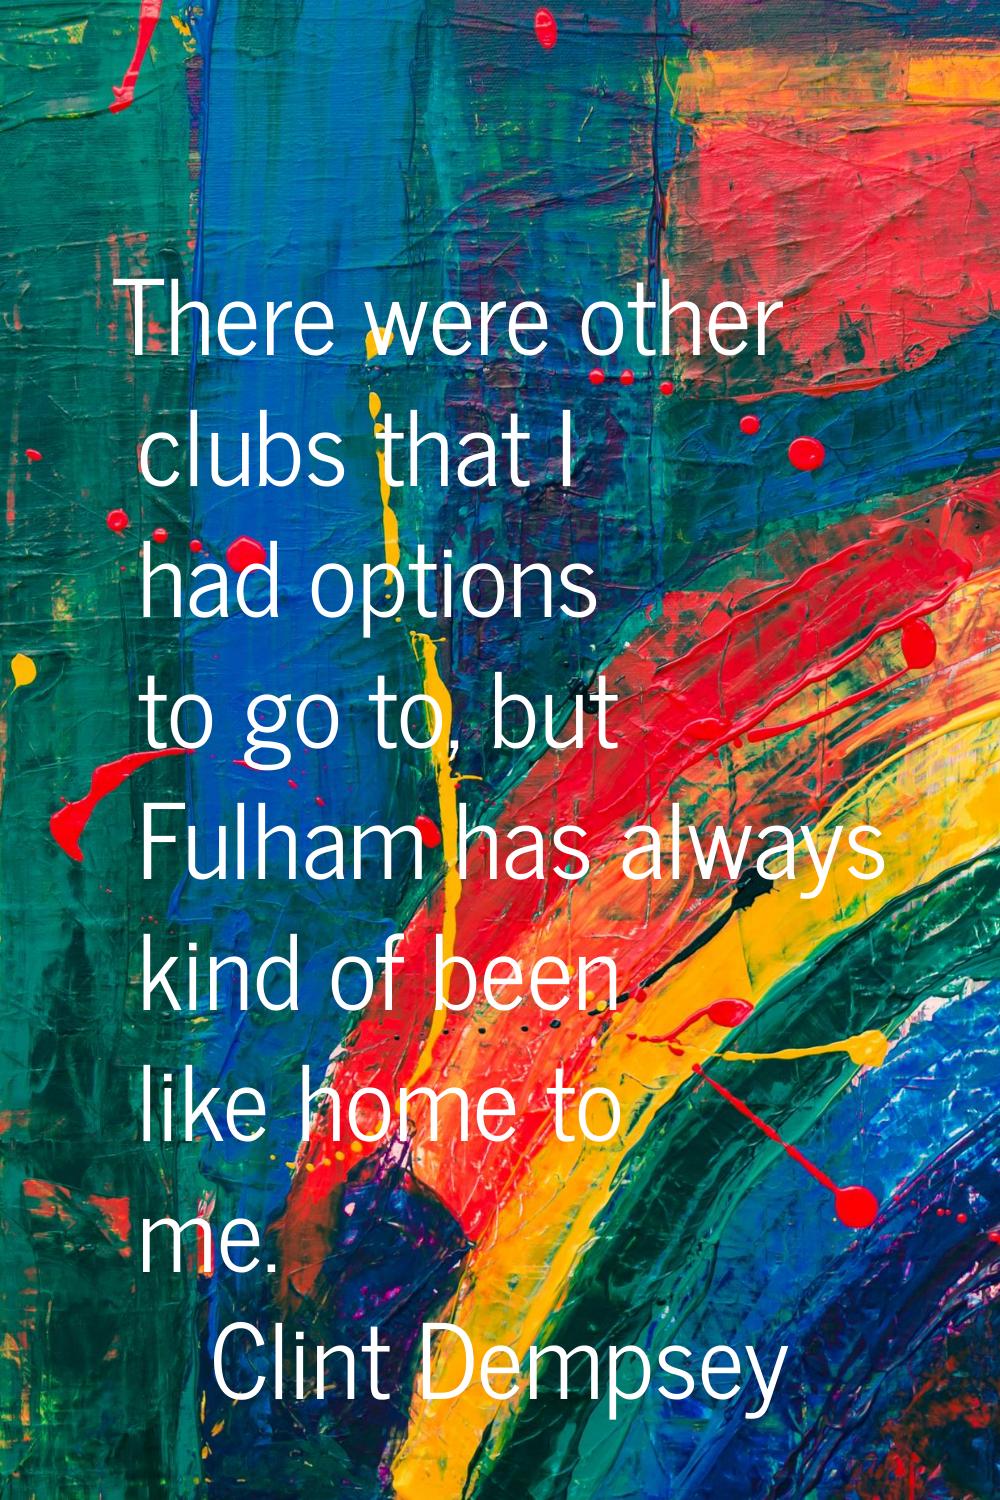 There were other clubs that I had options to go to, but Fulham has always kind of been like home to